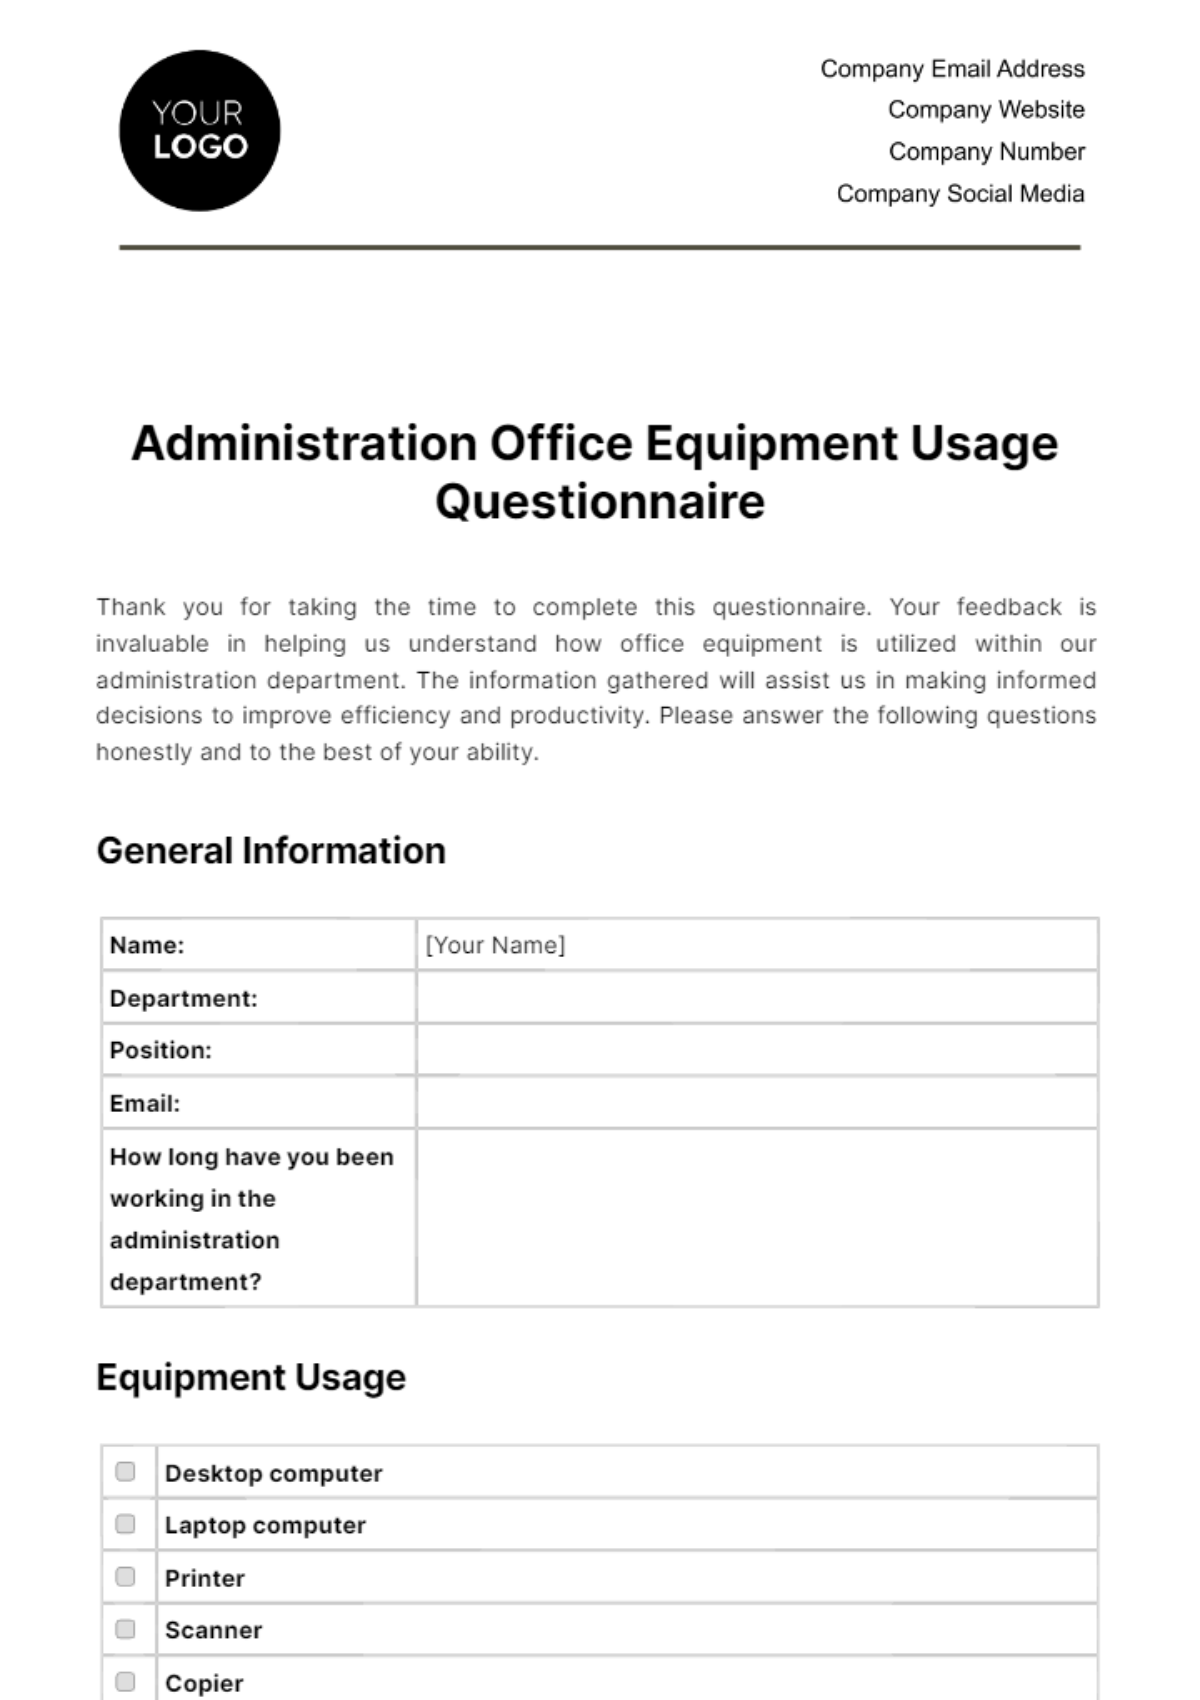 Free Administration Office Equipment Usage Questionnaire Template